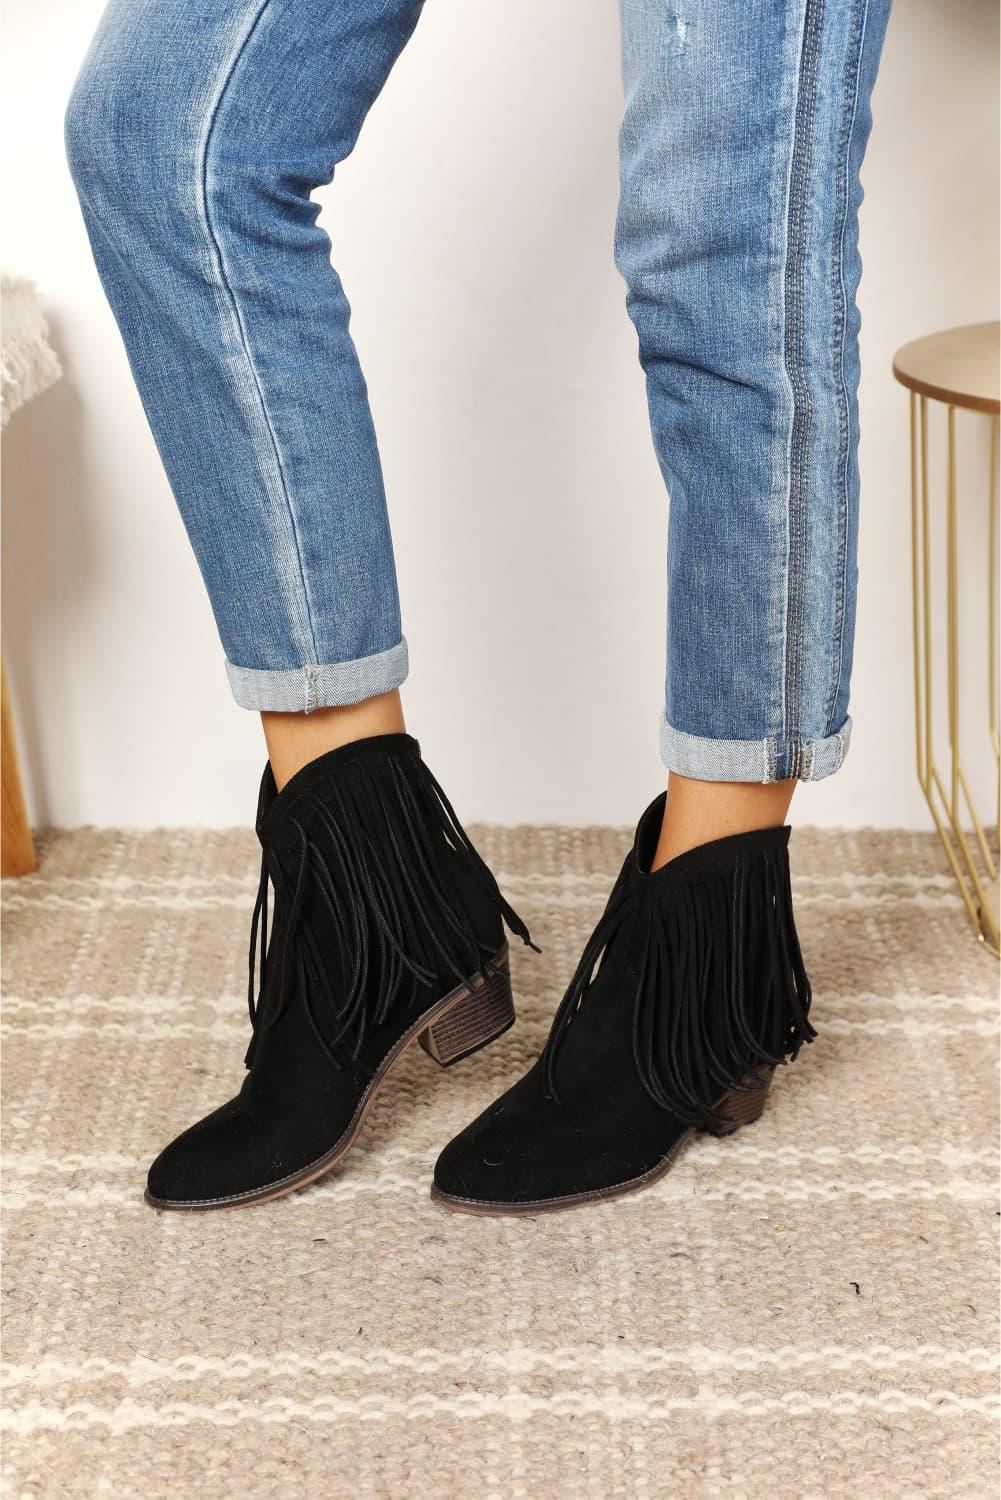 Fringe Ankle Booties - Black - Inspired Eye Boutique